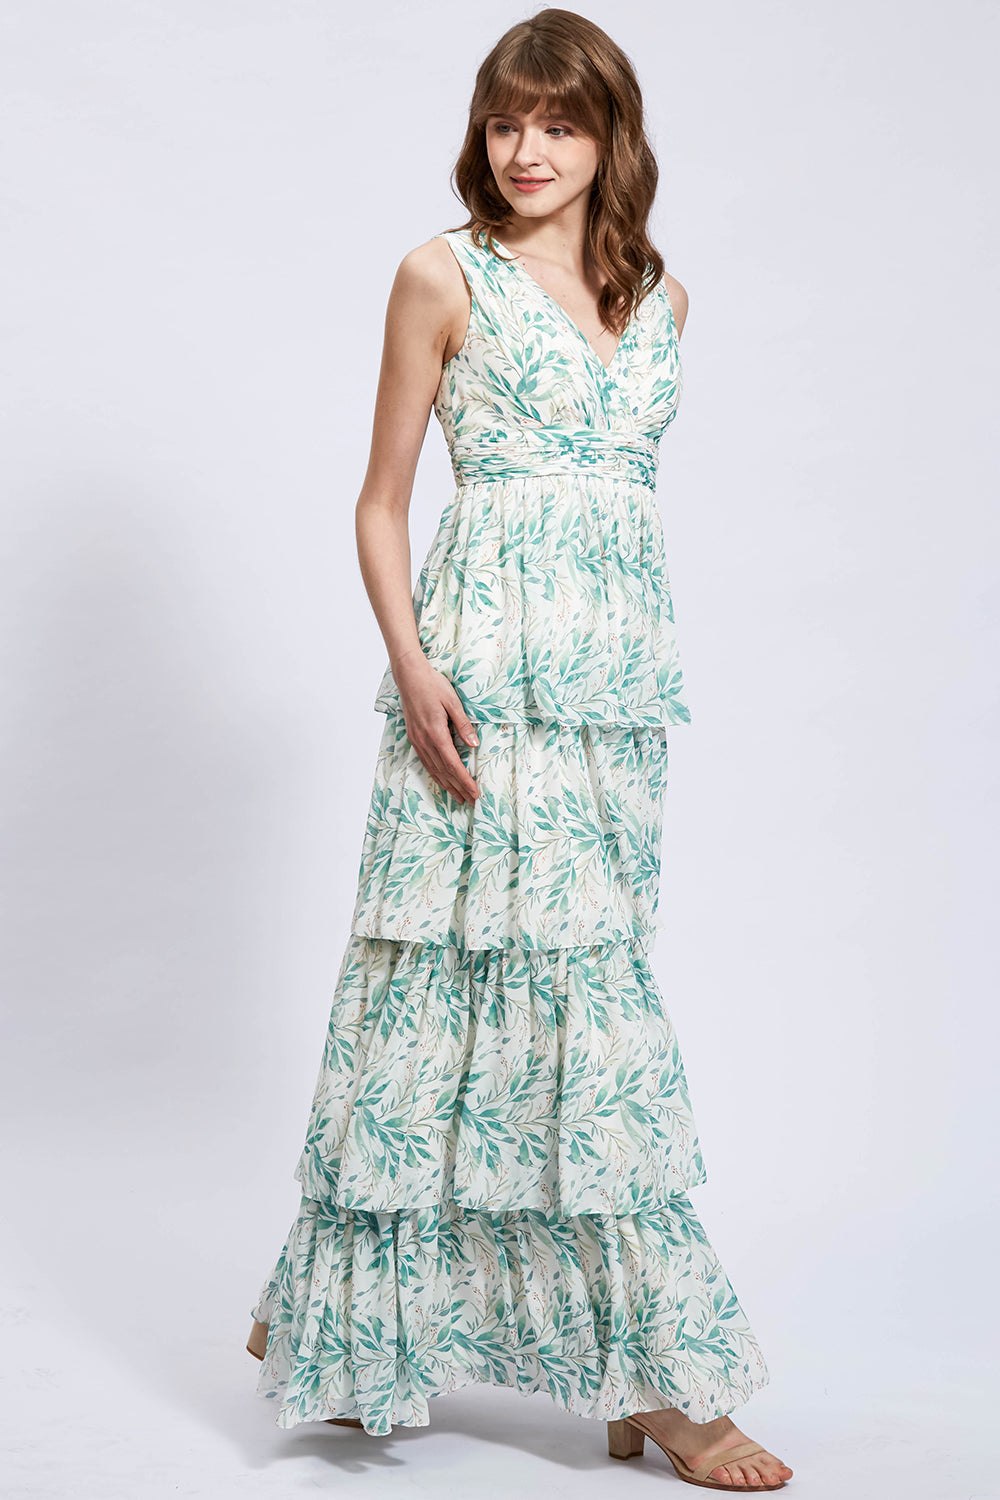 Straps V Neck Floral Chiffon Sage Tiered Formal Evening Gown